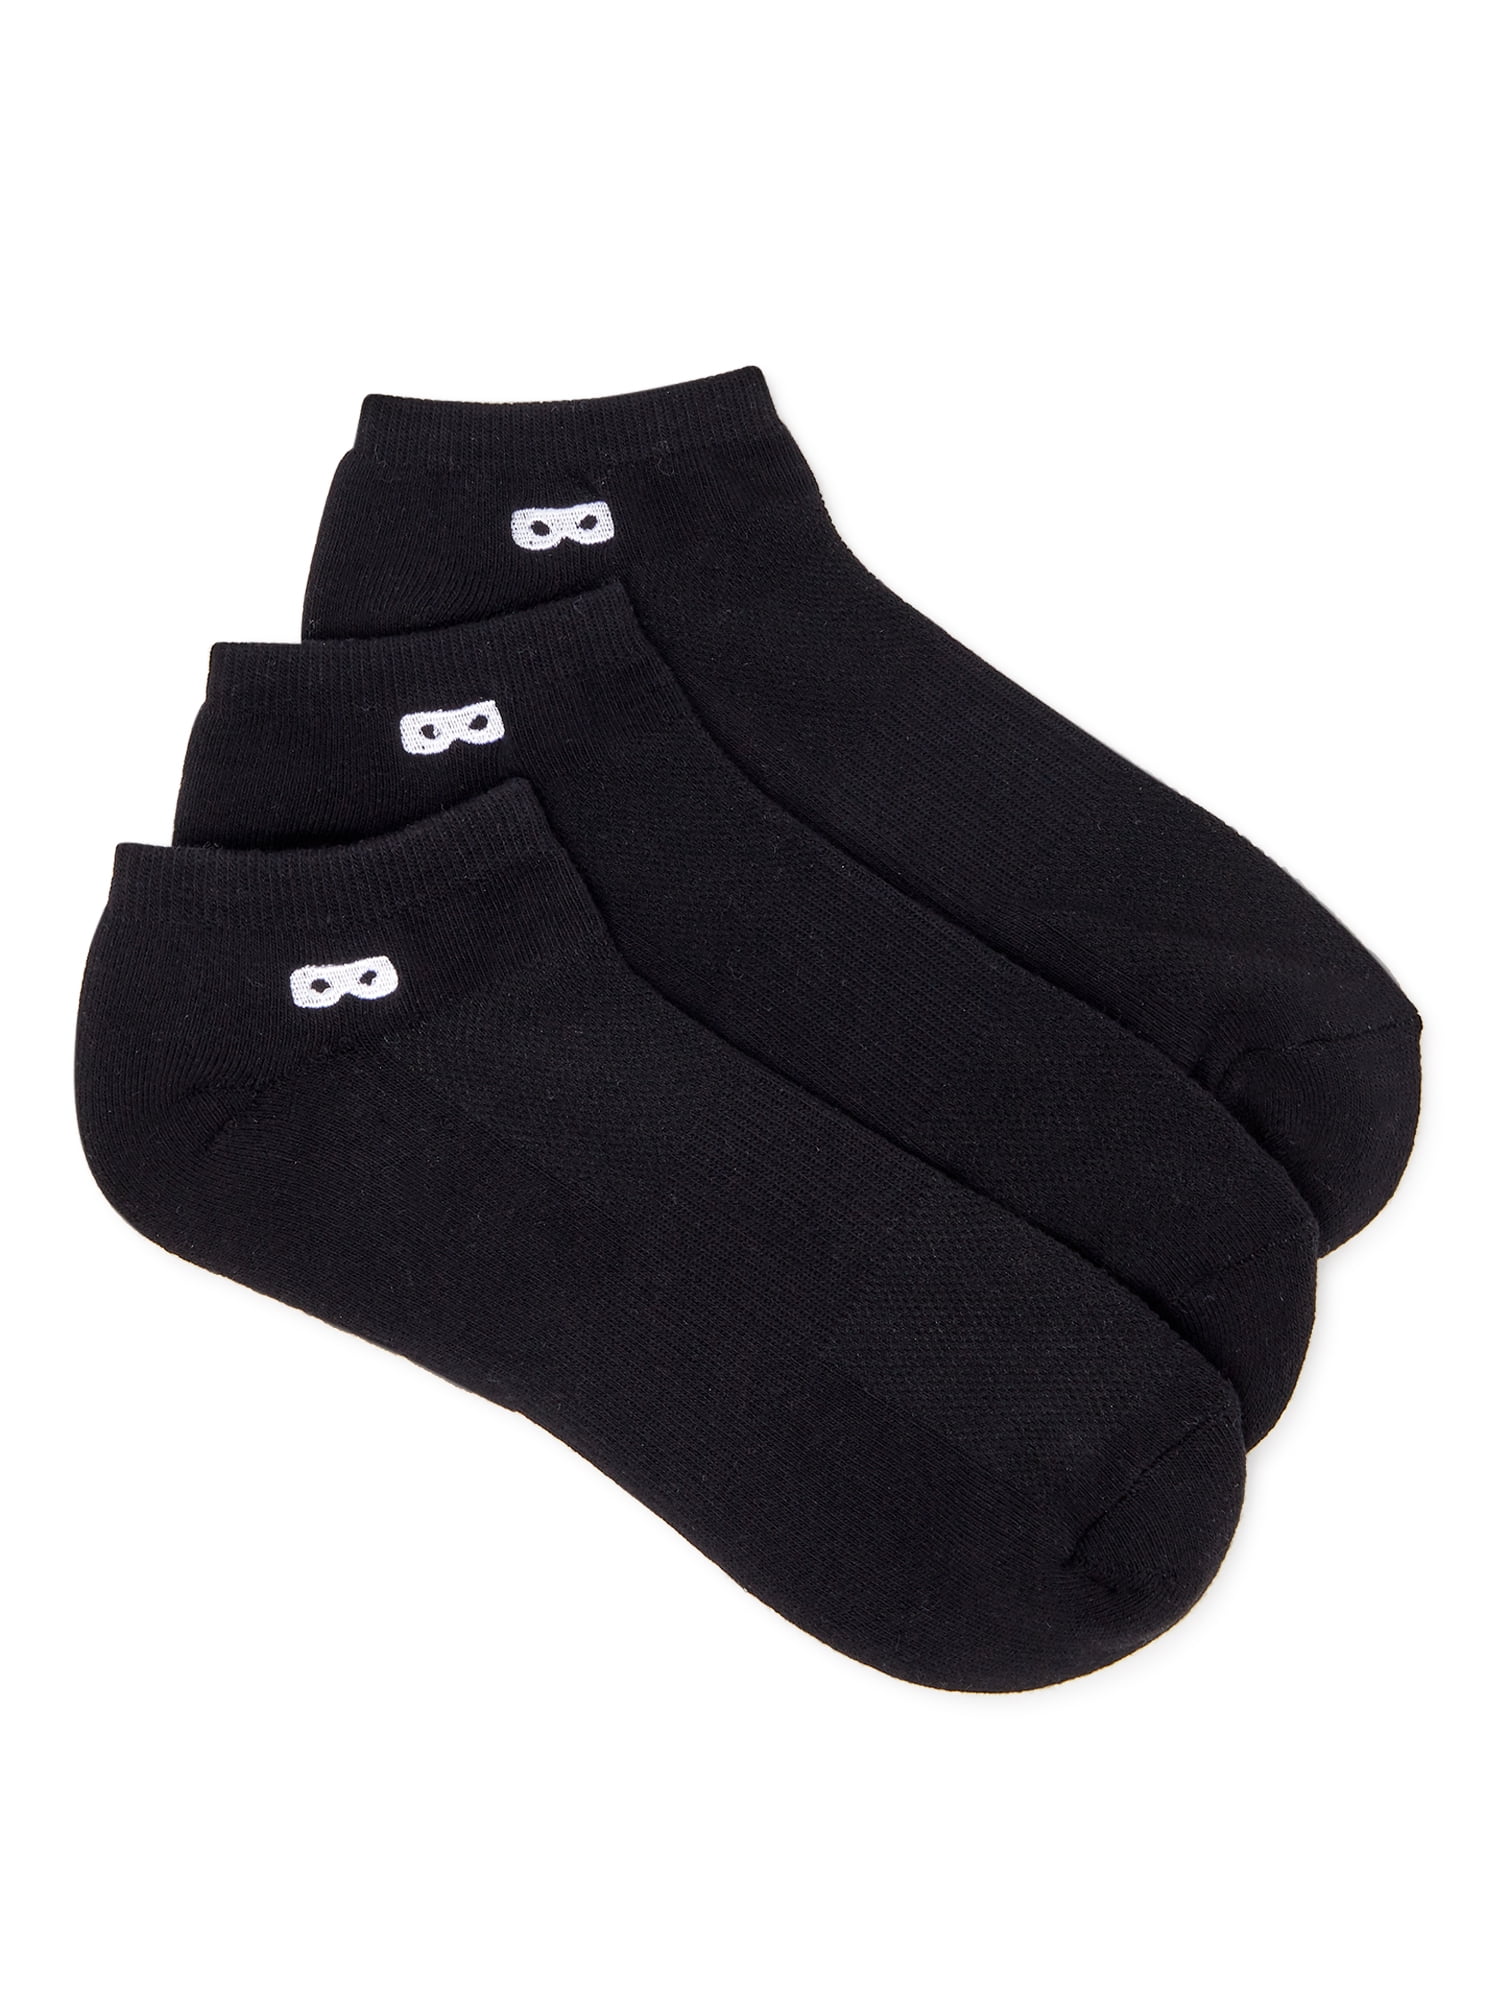 Pair of Thieves Blackout/Whiteout Cushioned Low Cut Socks, 3-Pack